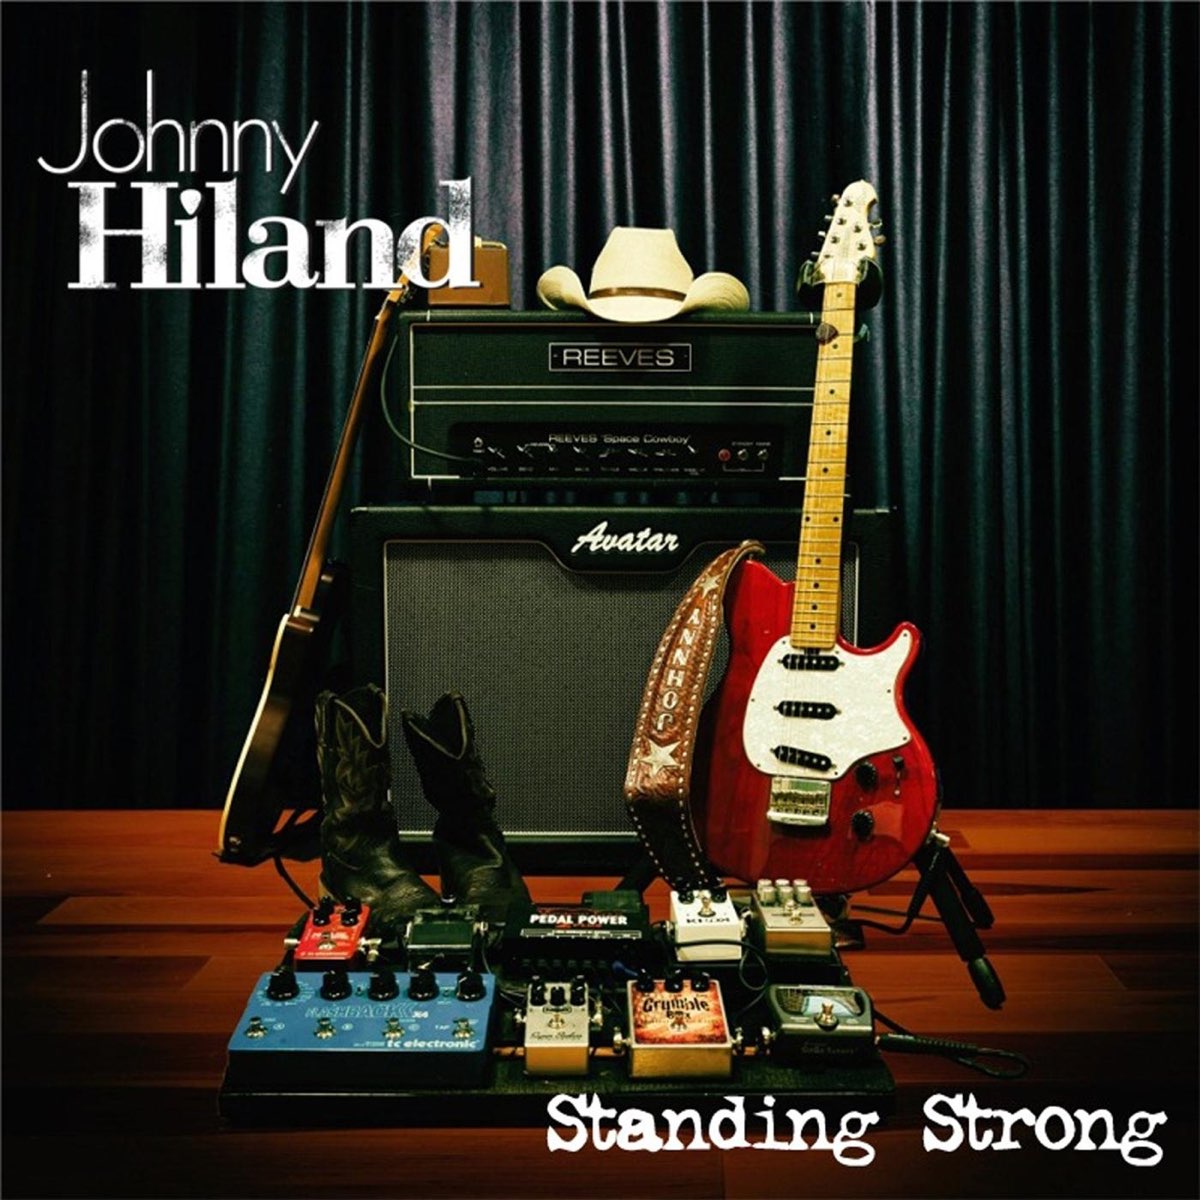 Stand strong. Johnny Hiland. Радио гитара.